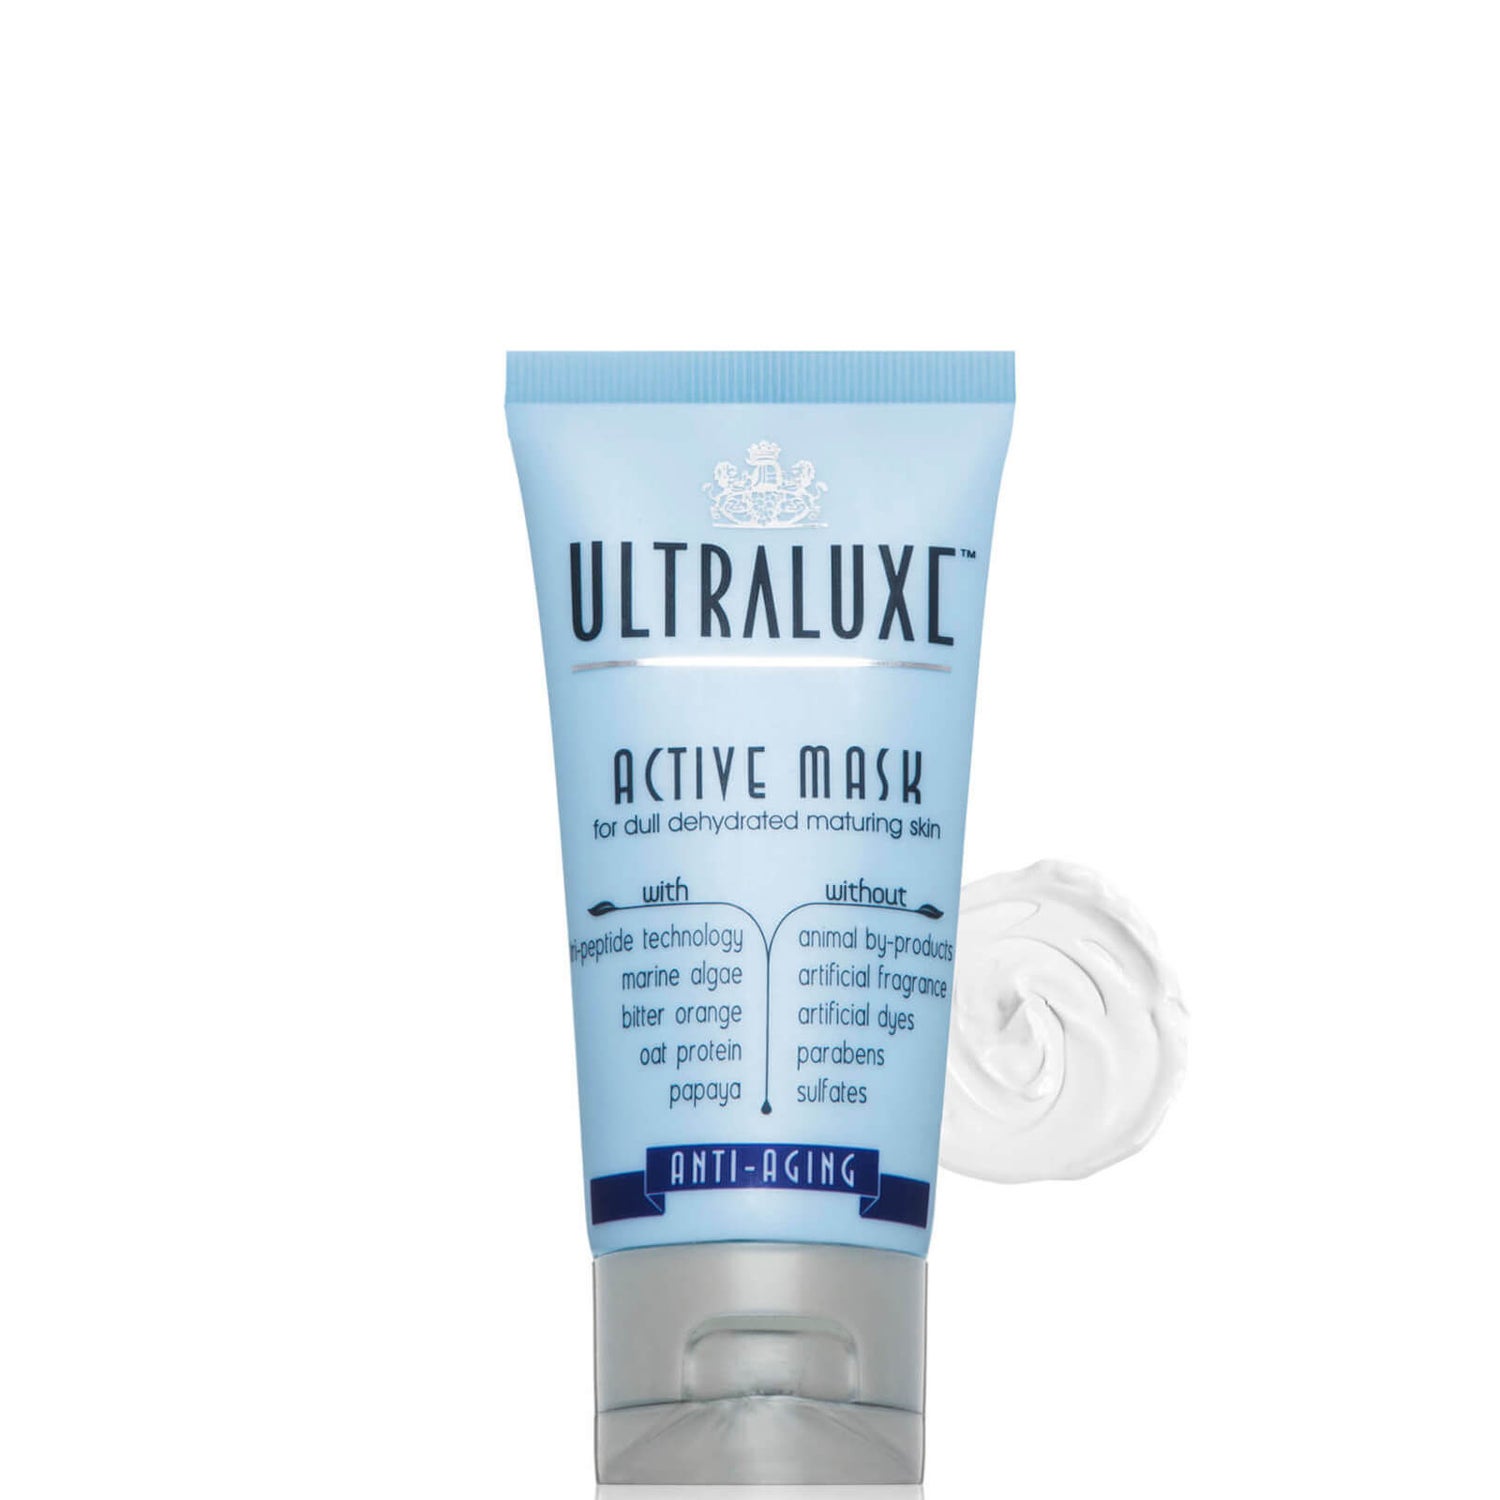 UltraLuxe Age Control Active Mask 1.75 oz.